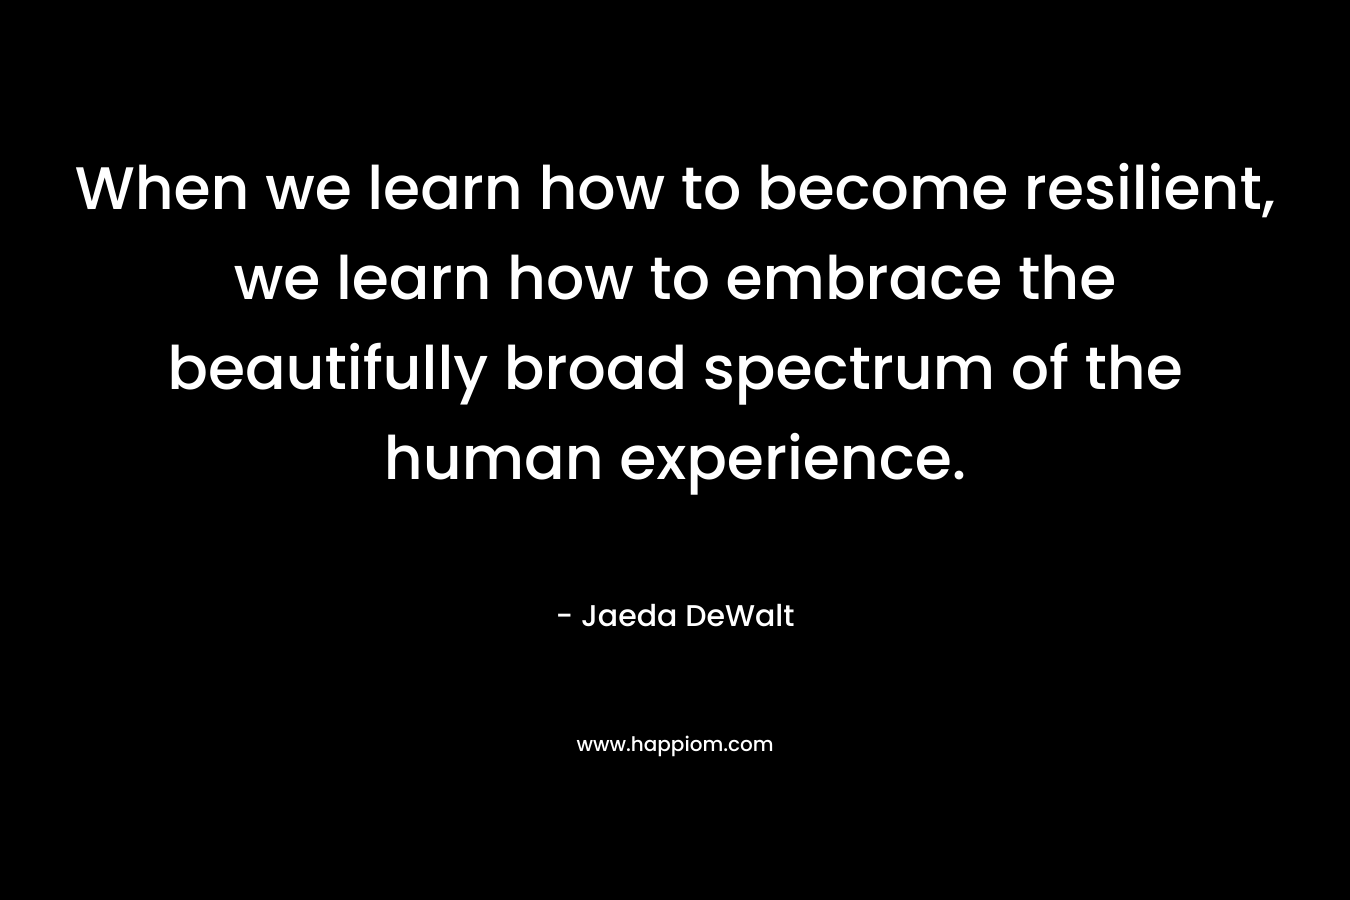 When we learn how to become resilient, we learn how to embrace the beautifully broad spectrum of the human experience. – Jaeda DeWalt